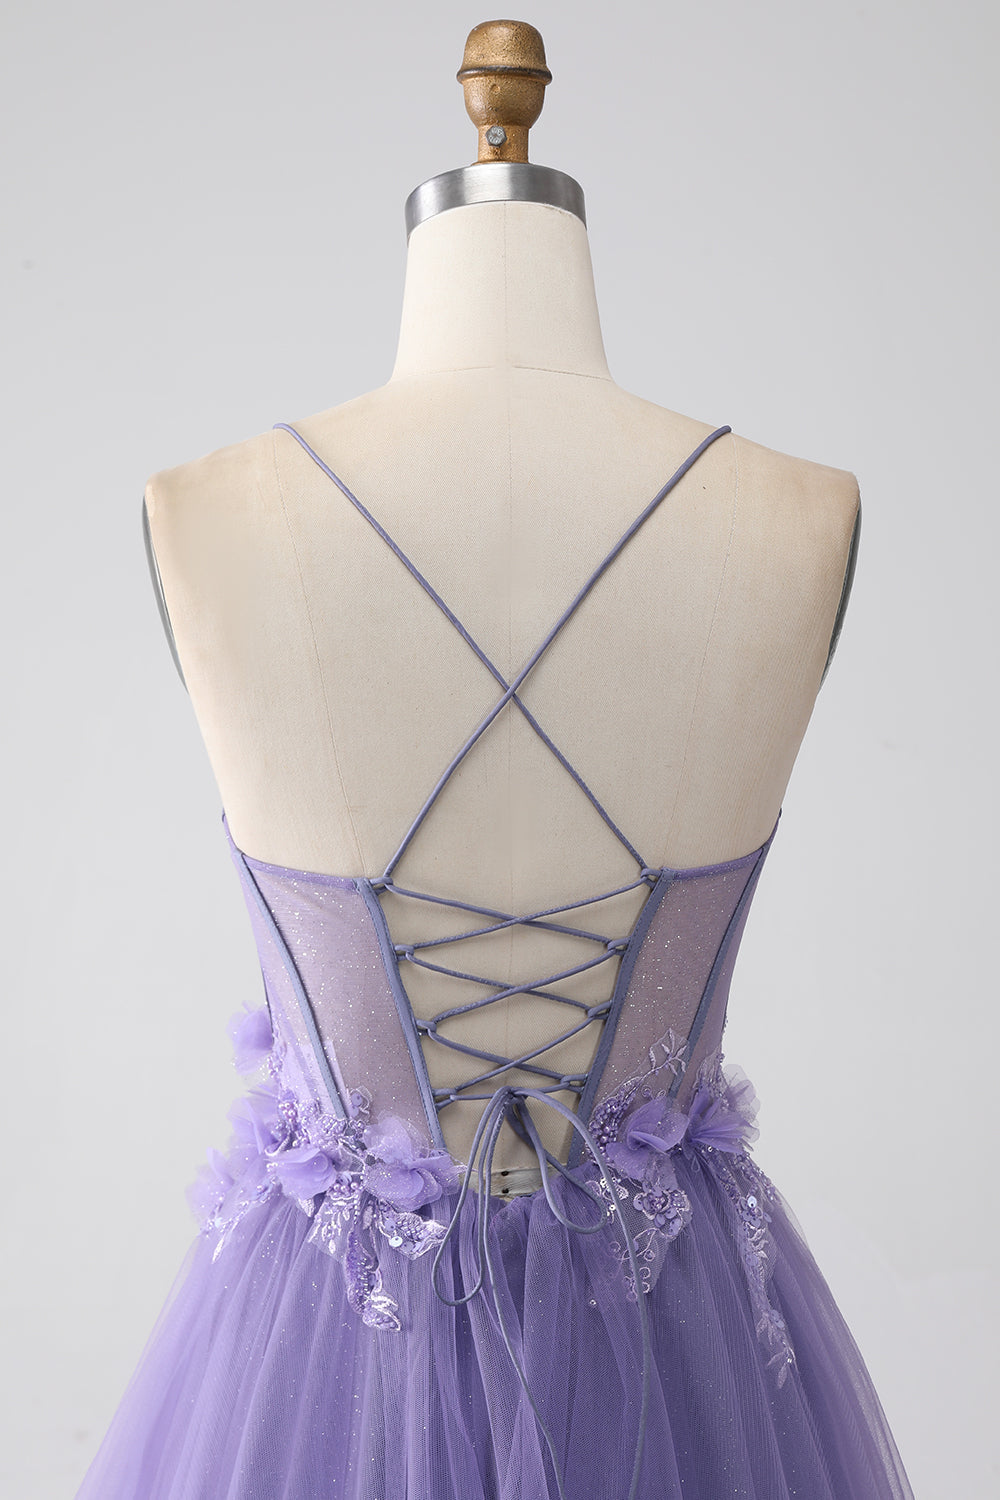 Purple A-Line Spaghetti Straps Corset Prom Dress with 3D Flowers